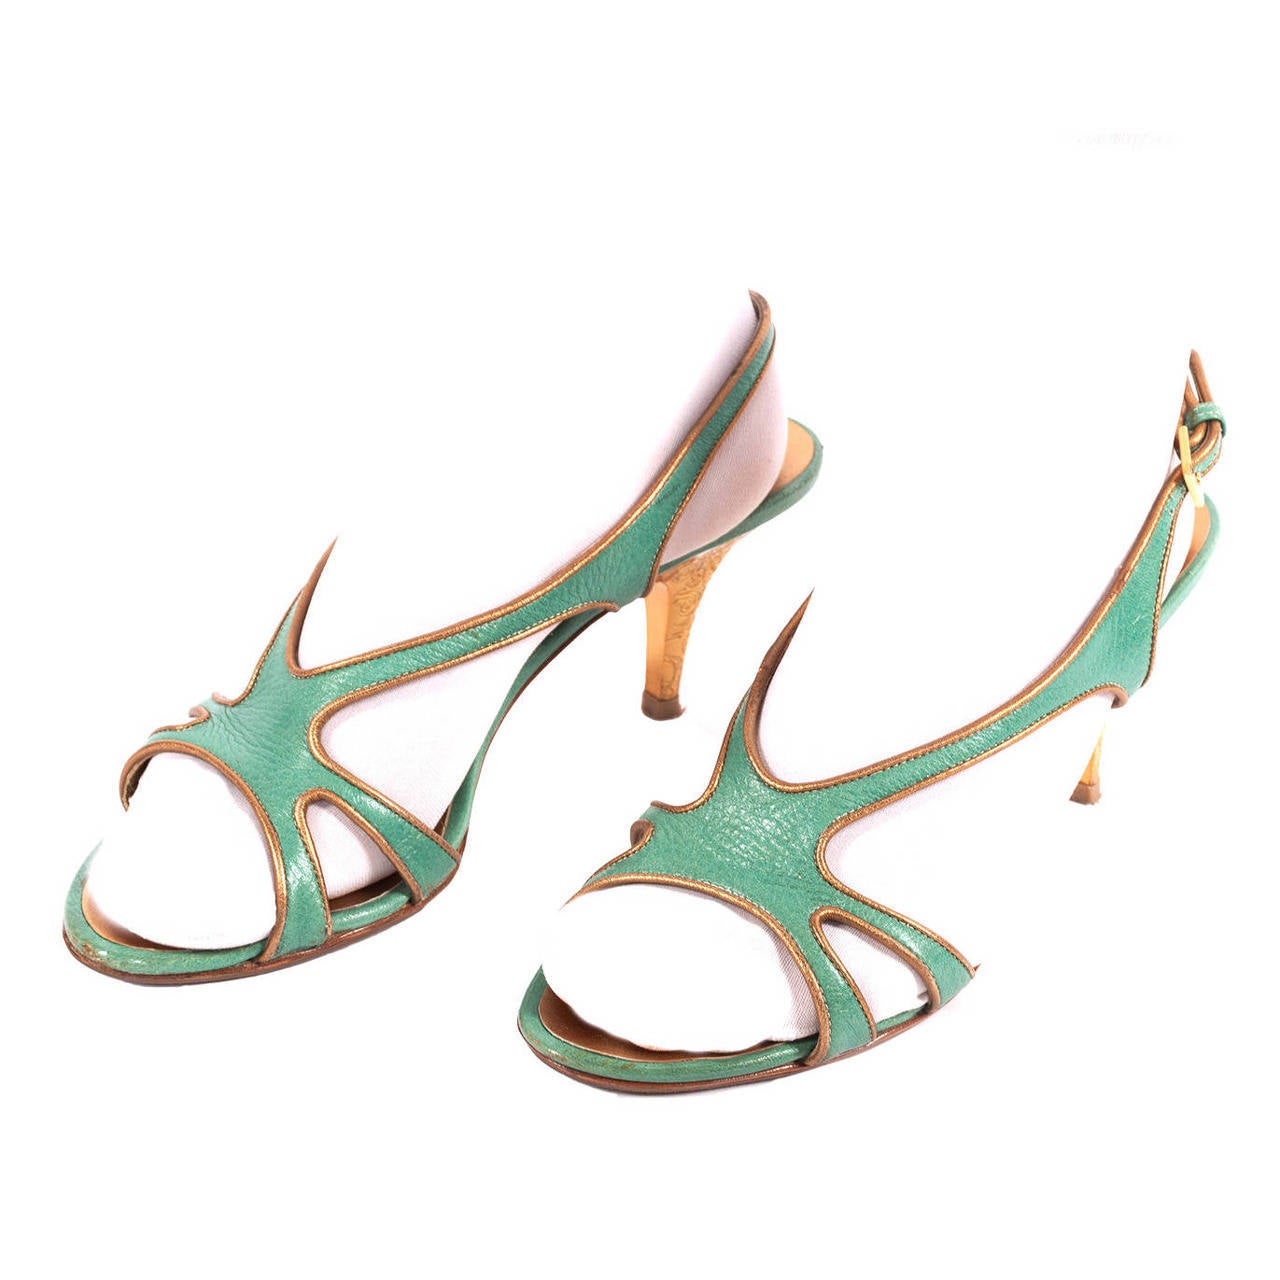 Escada Celadon green sling back heels with gold interior, baroque style kitten heel. Heels are open toe, with multiple straps in front, fully lined in gold leather, carved baroque style kitten heel.